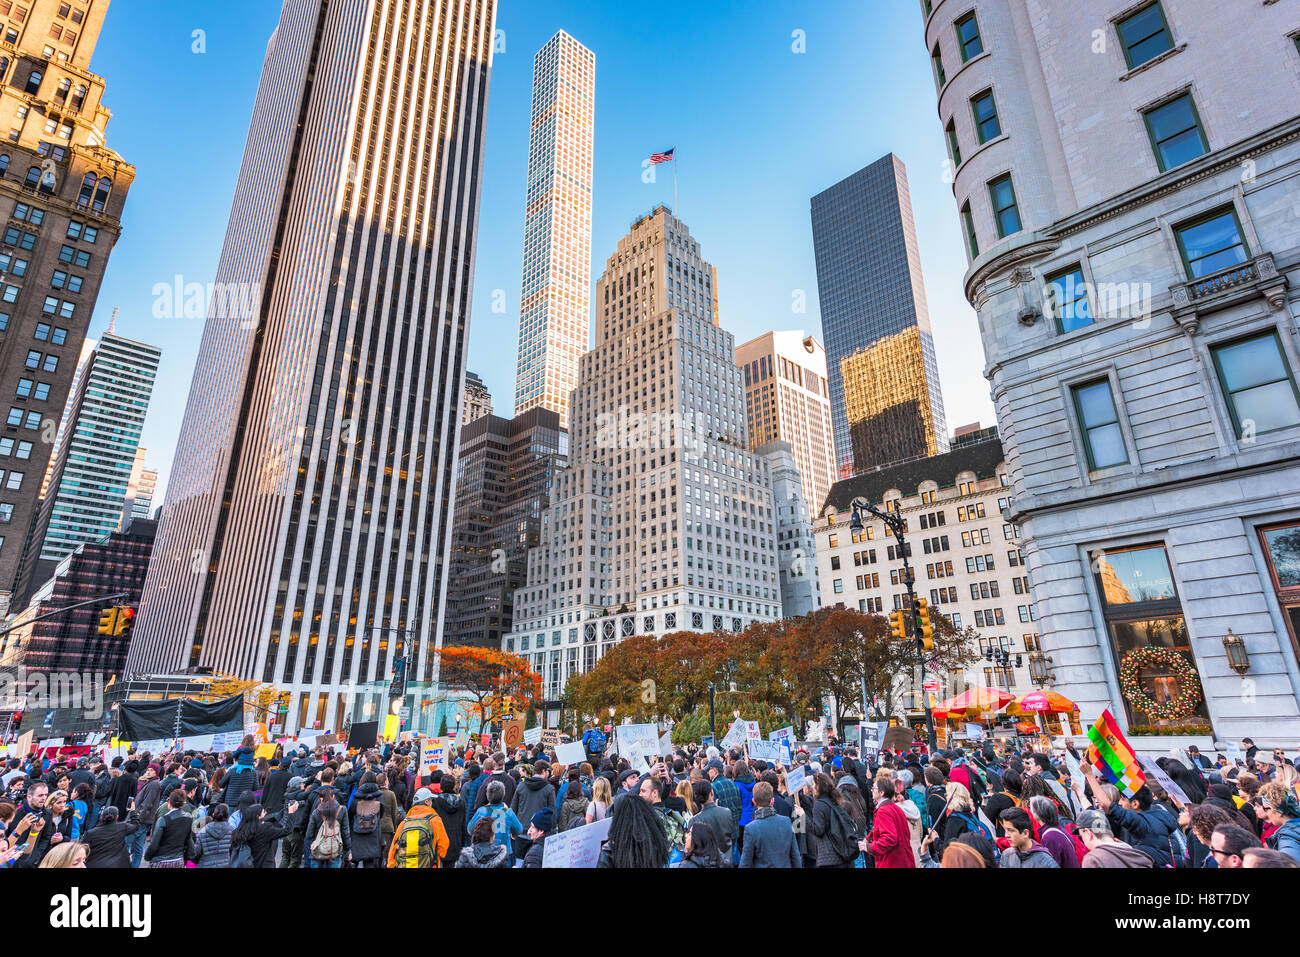 NEW YORK CITY - NOVEMBER 13, 2016:  Crowds on 5th Avenue march towards Trump Tower to protest President-elect Donald Trump. Stock Photo